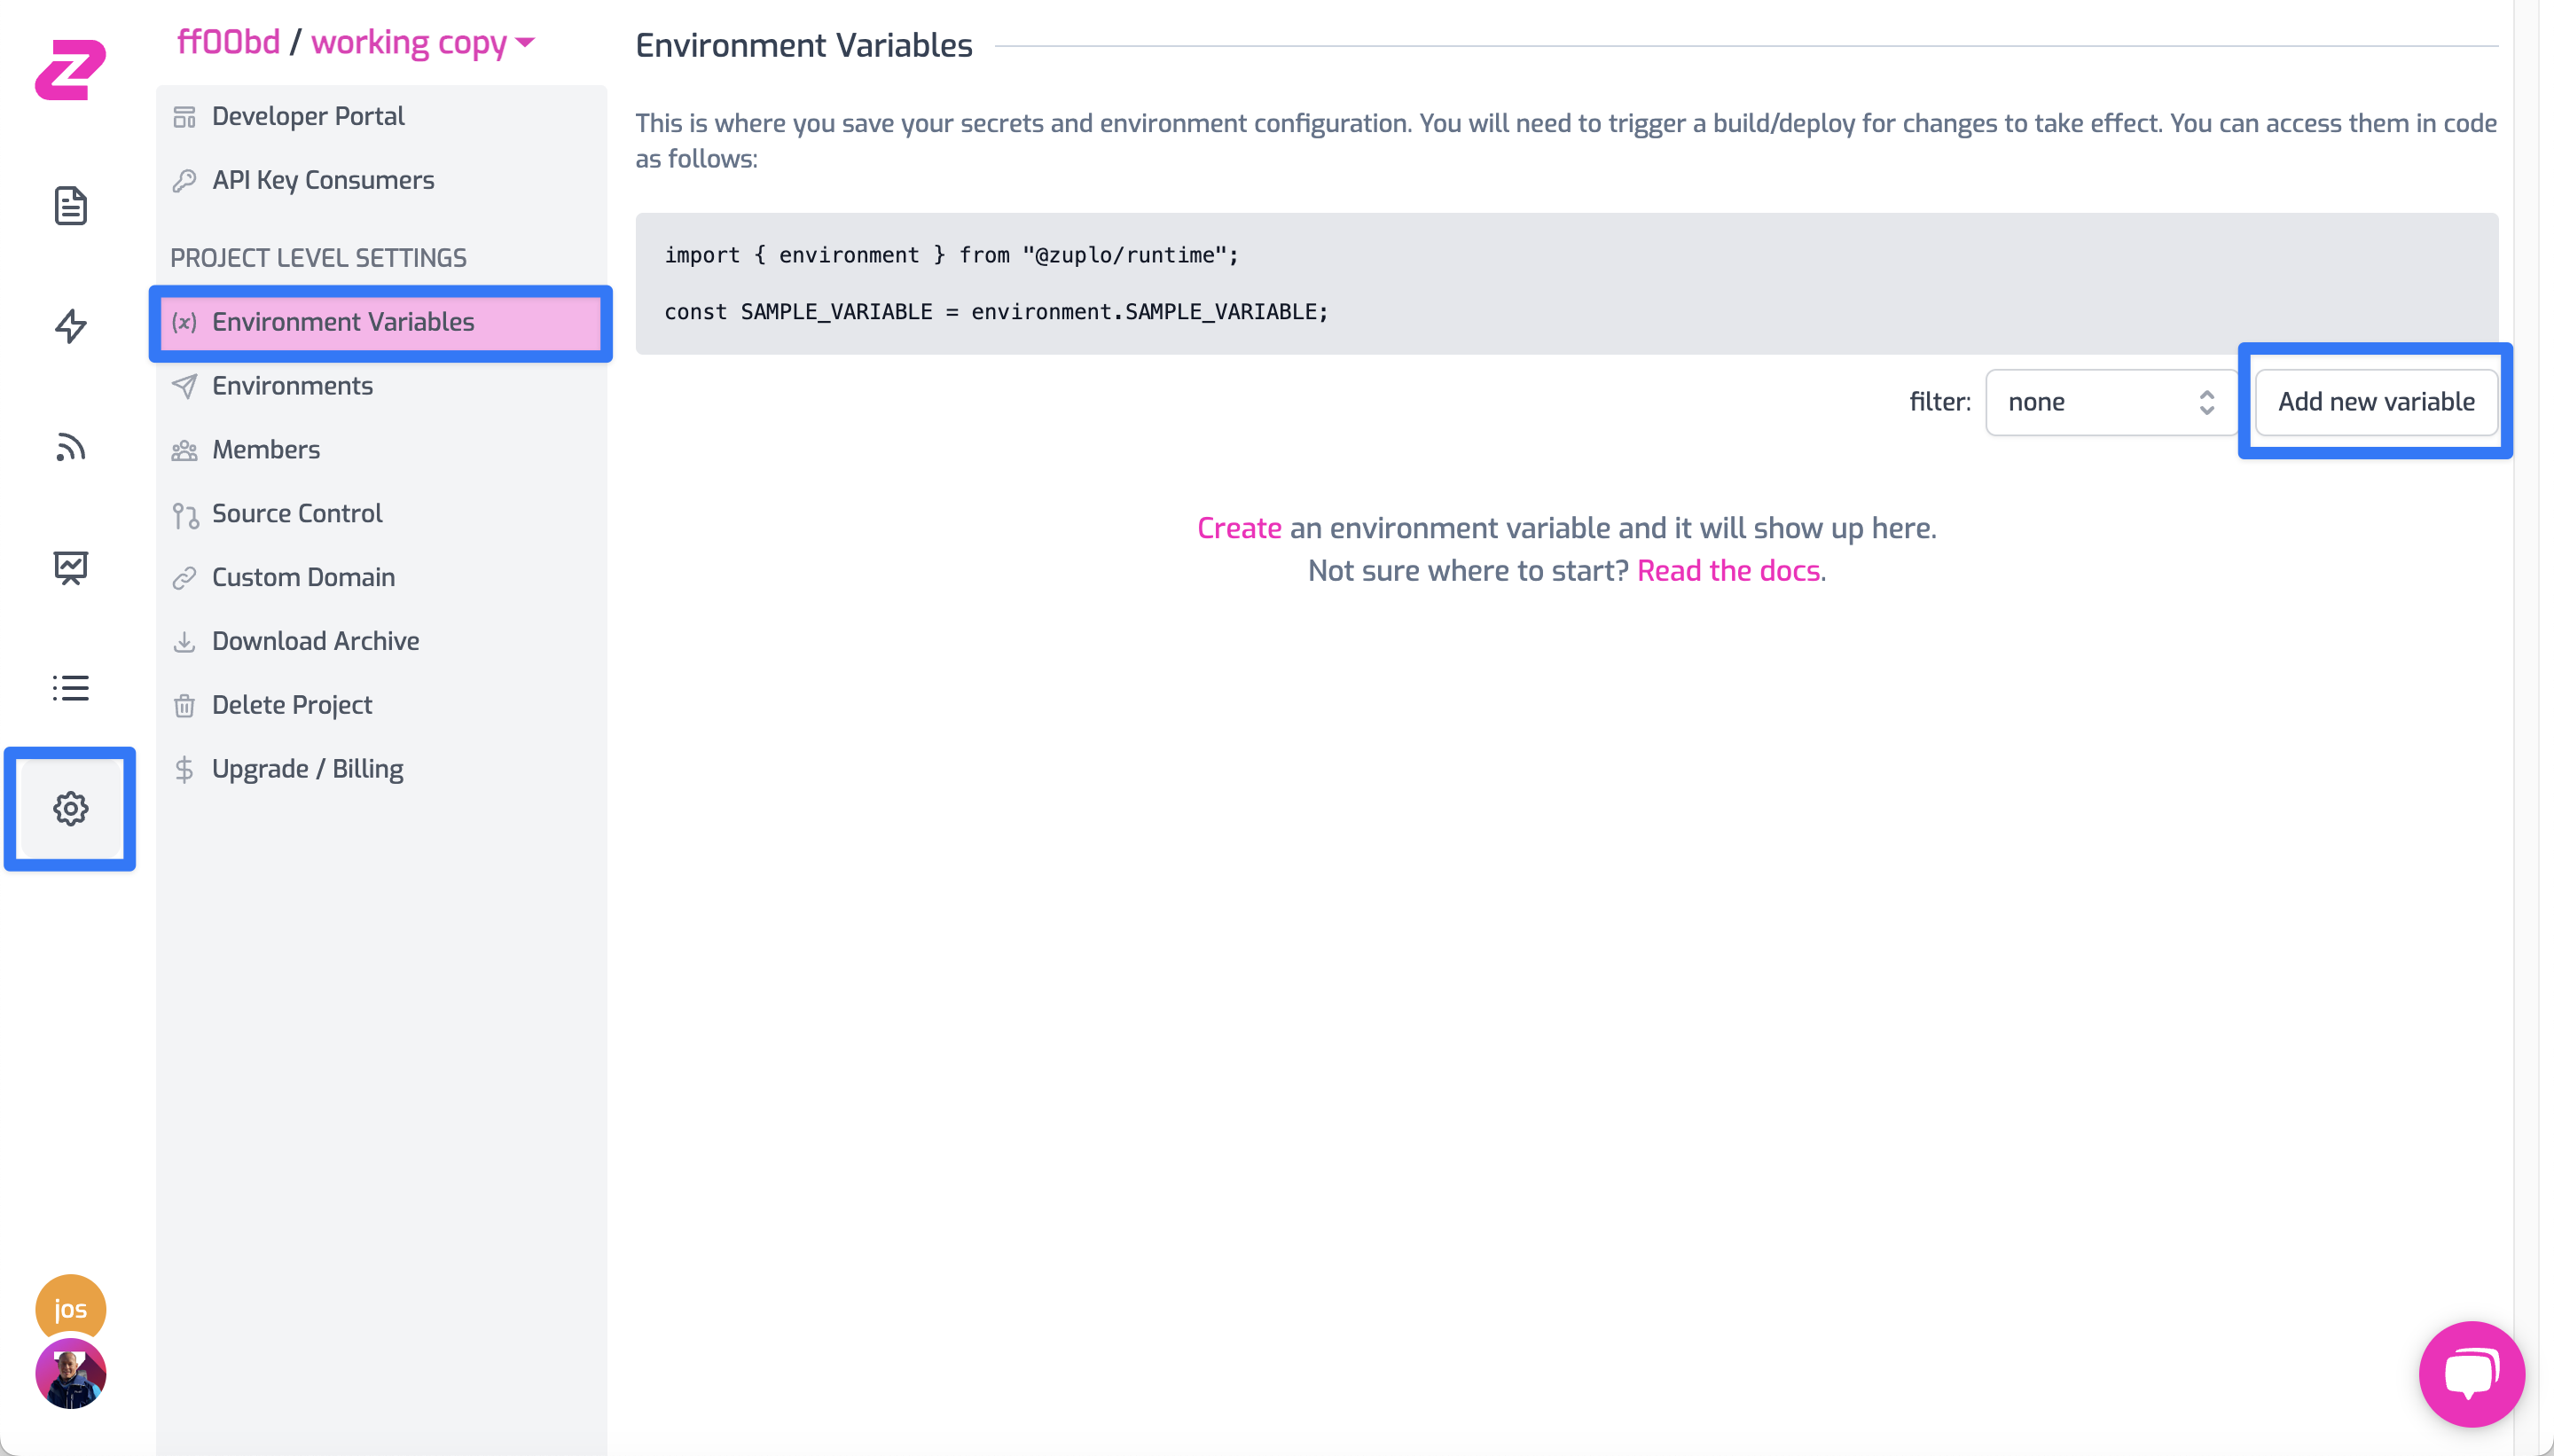 Add new Environment Variable